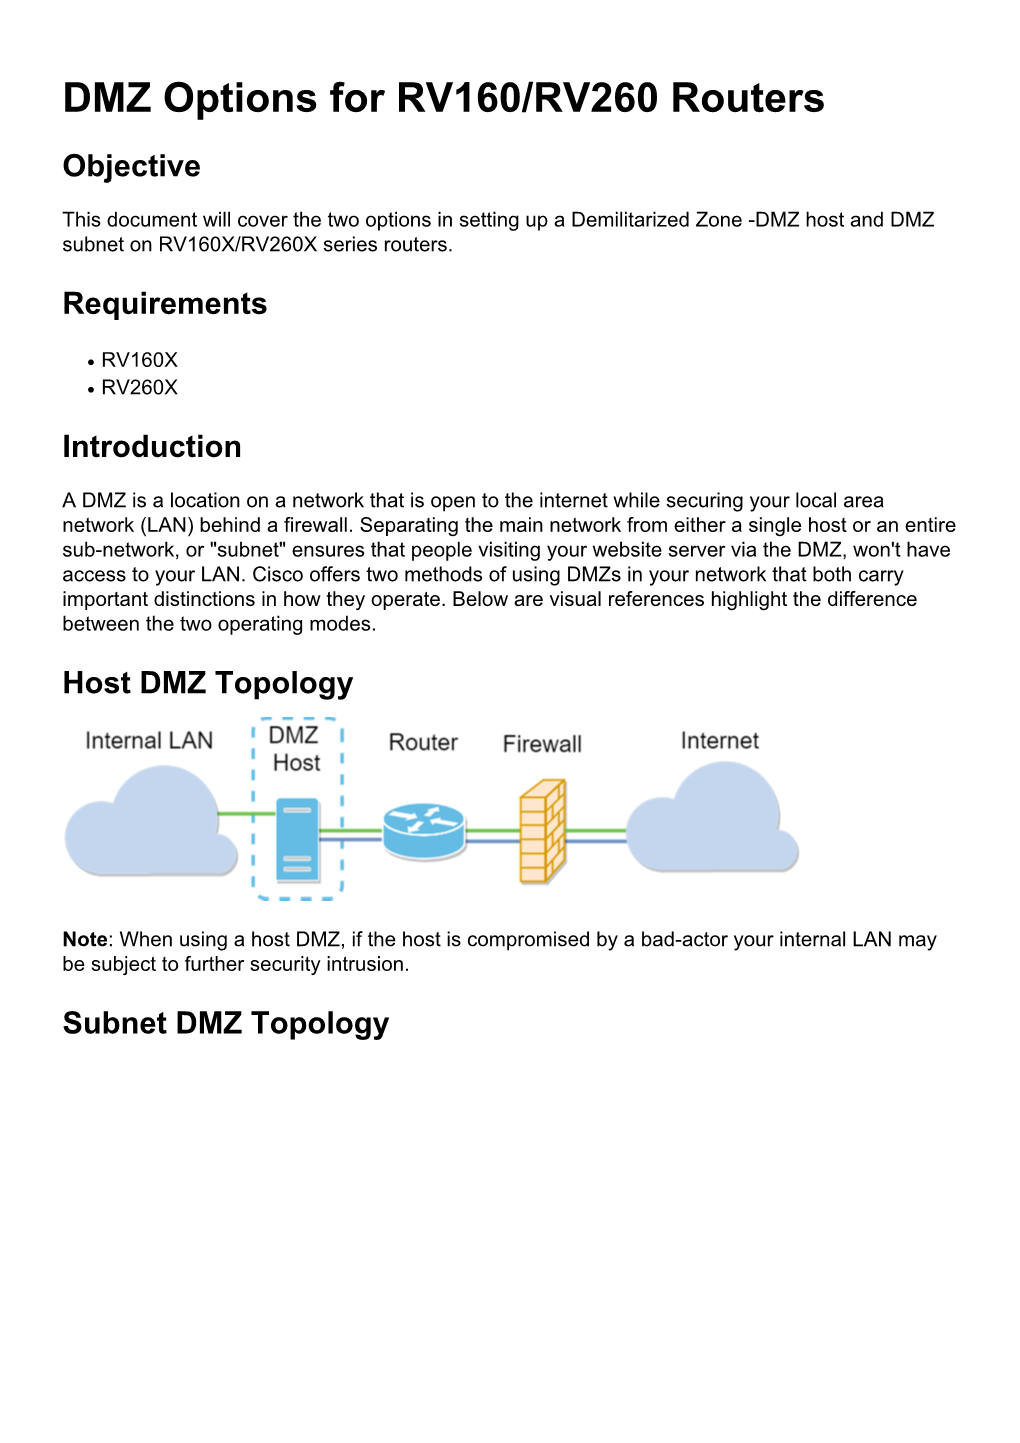 DMZ Options for RV160/RV260 Routers